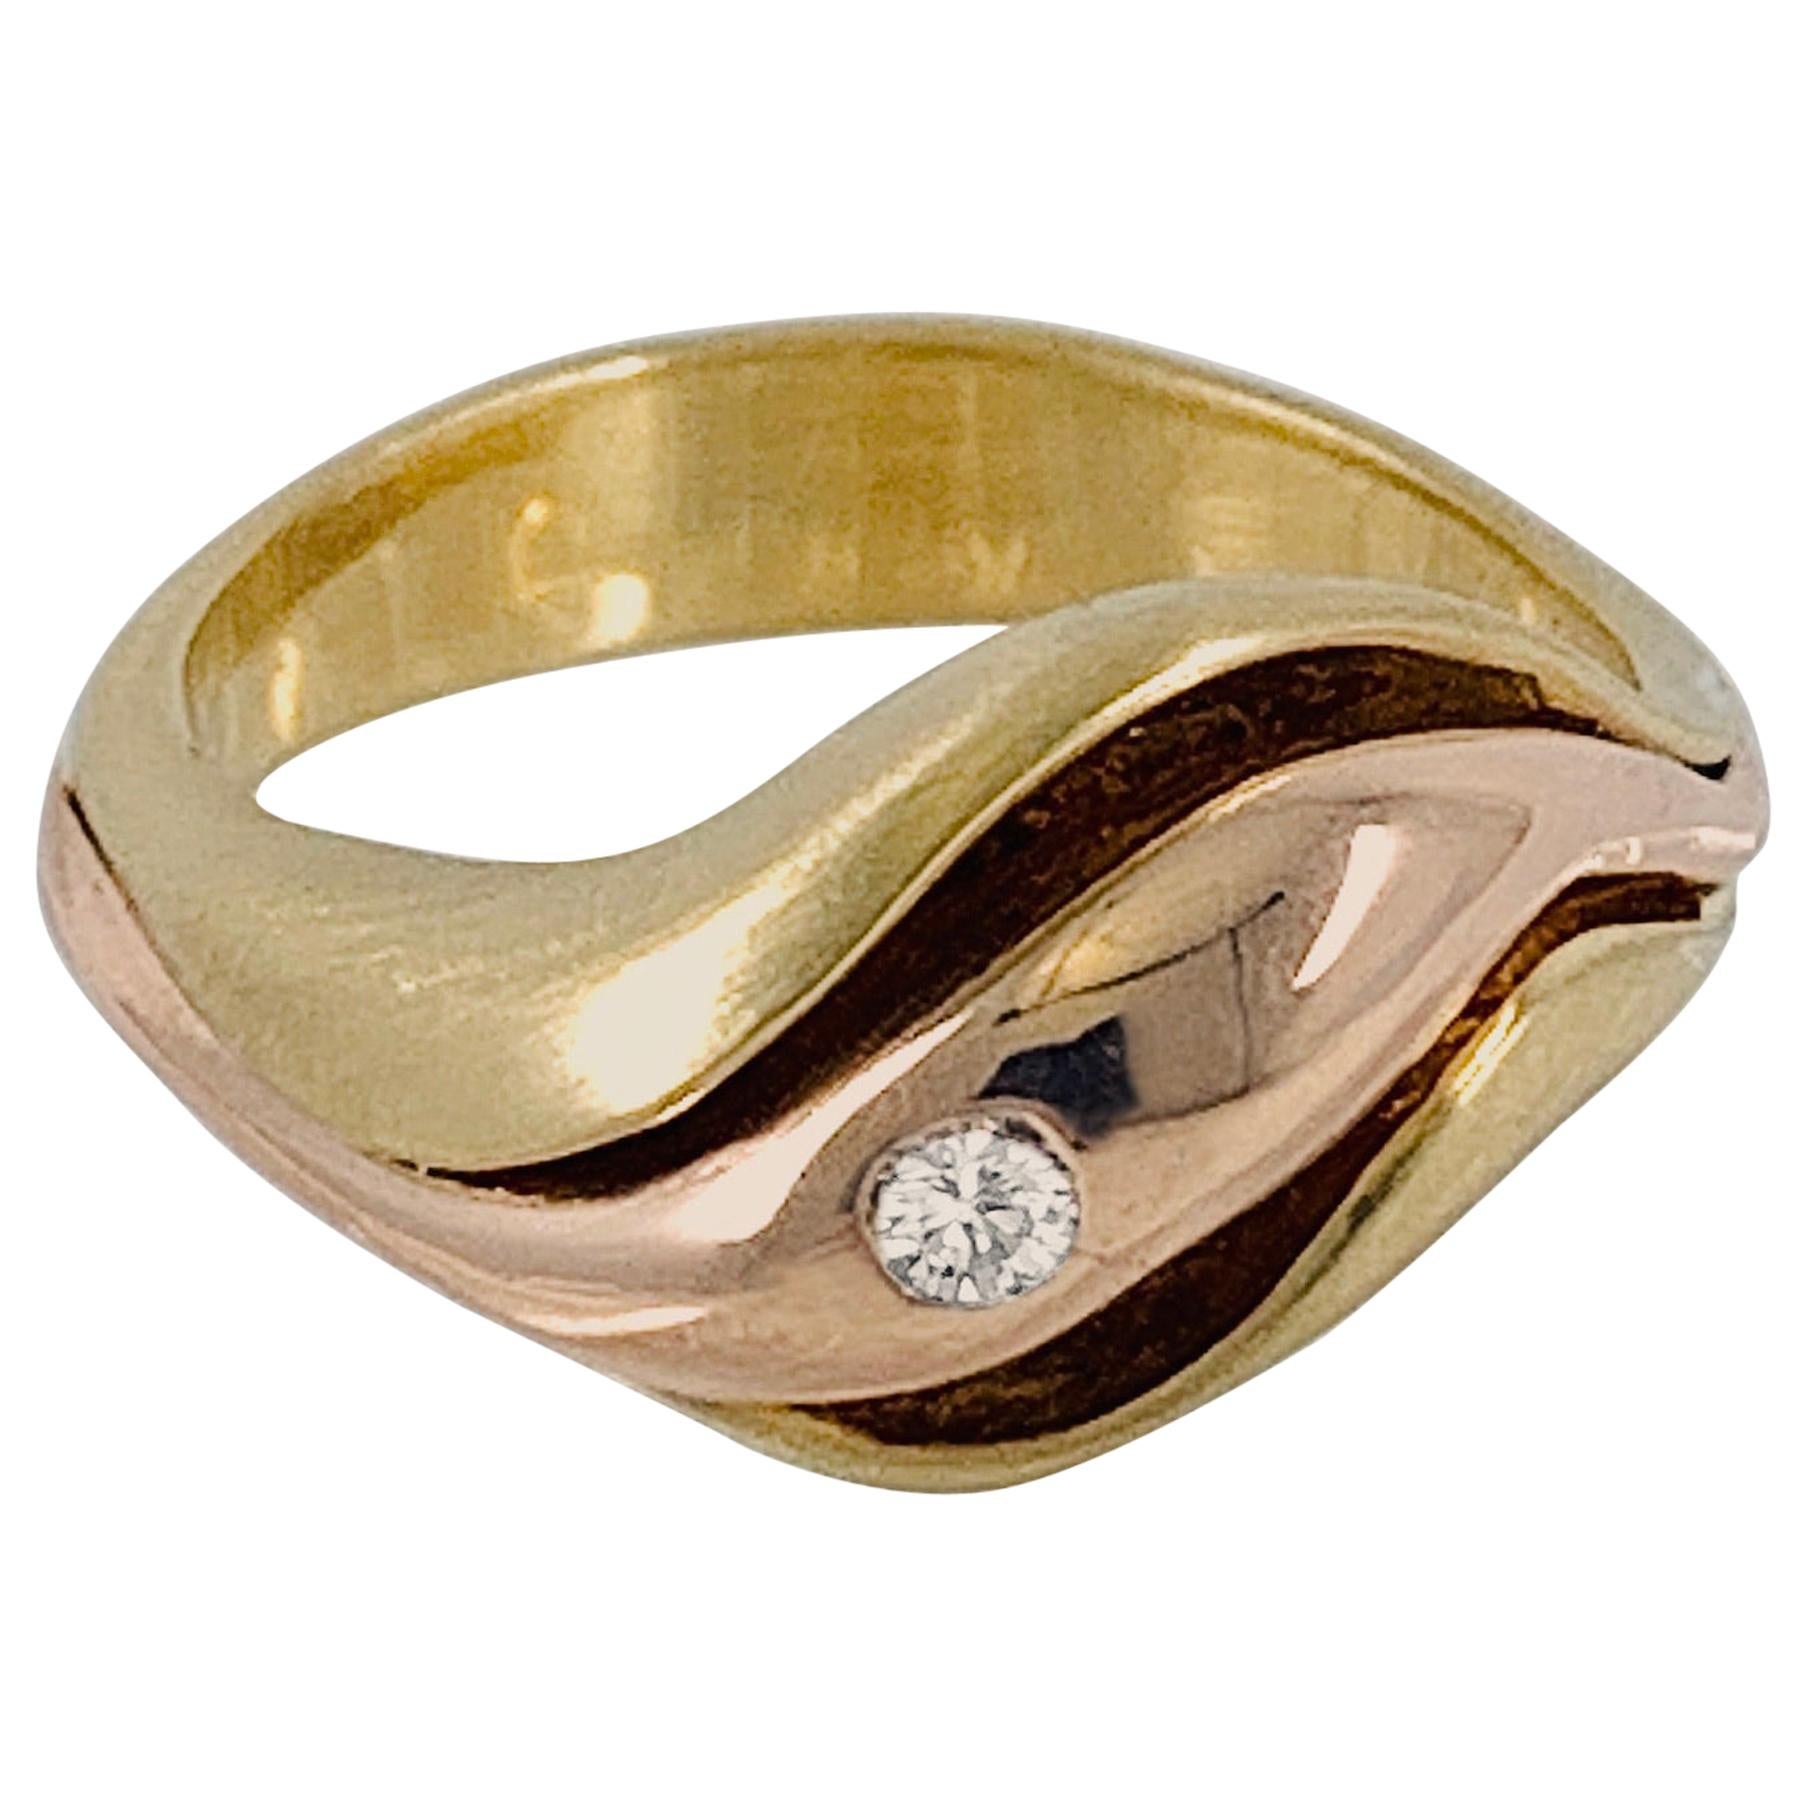 "Swerve" Contoured Band in Brushed Yellow and Polished Rose Gold with Diamond